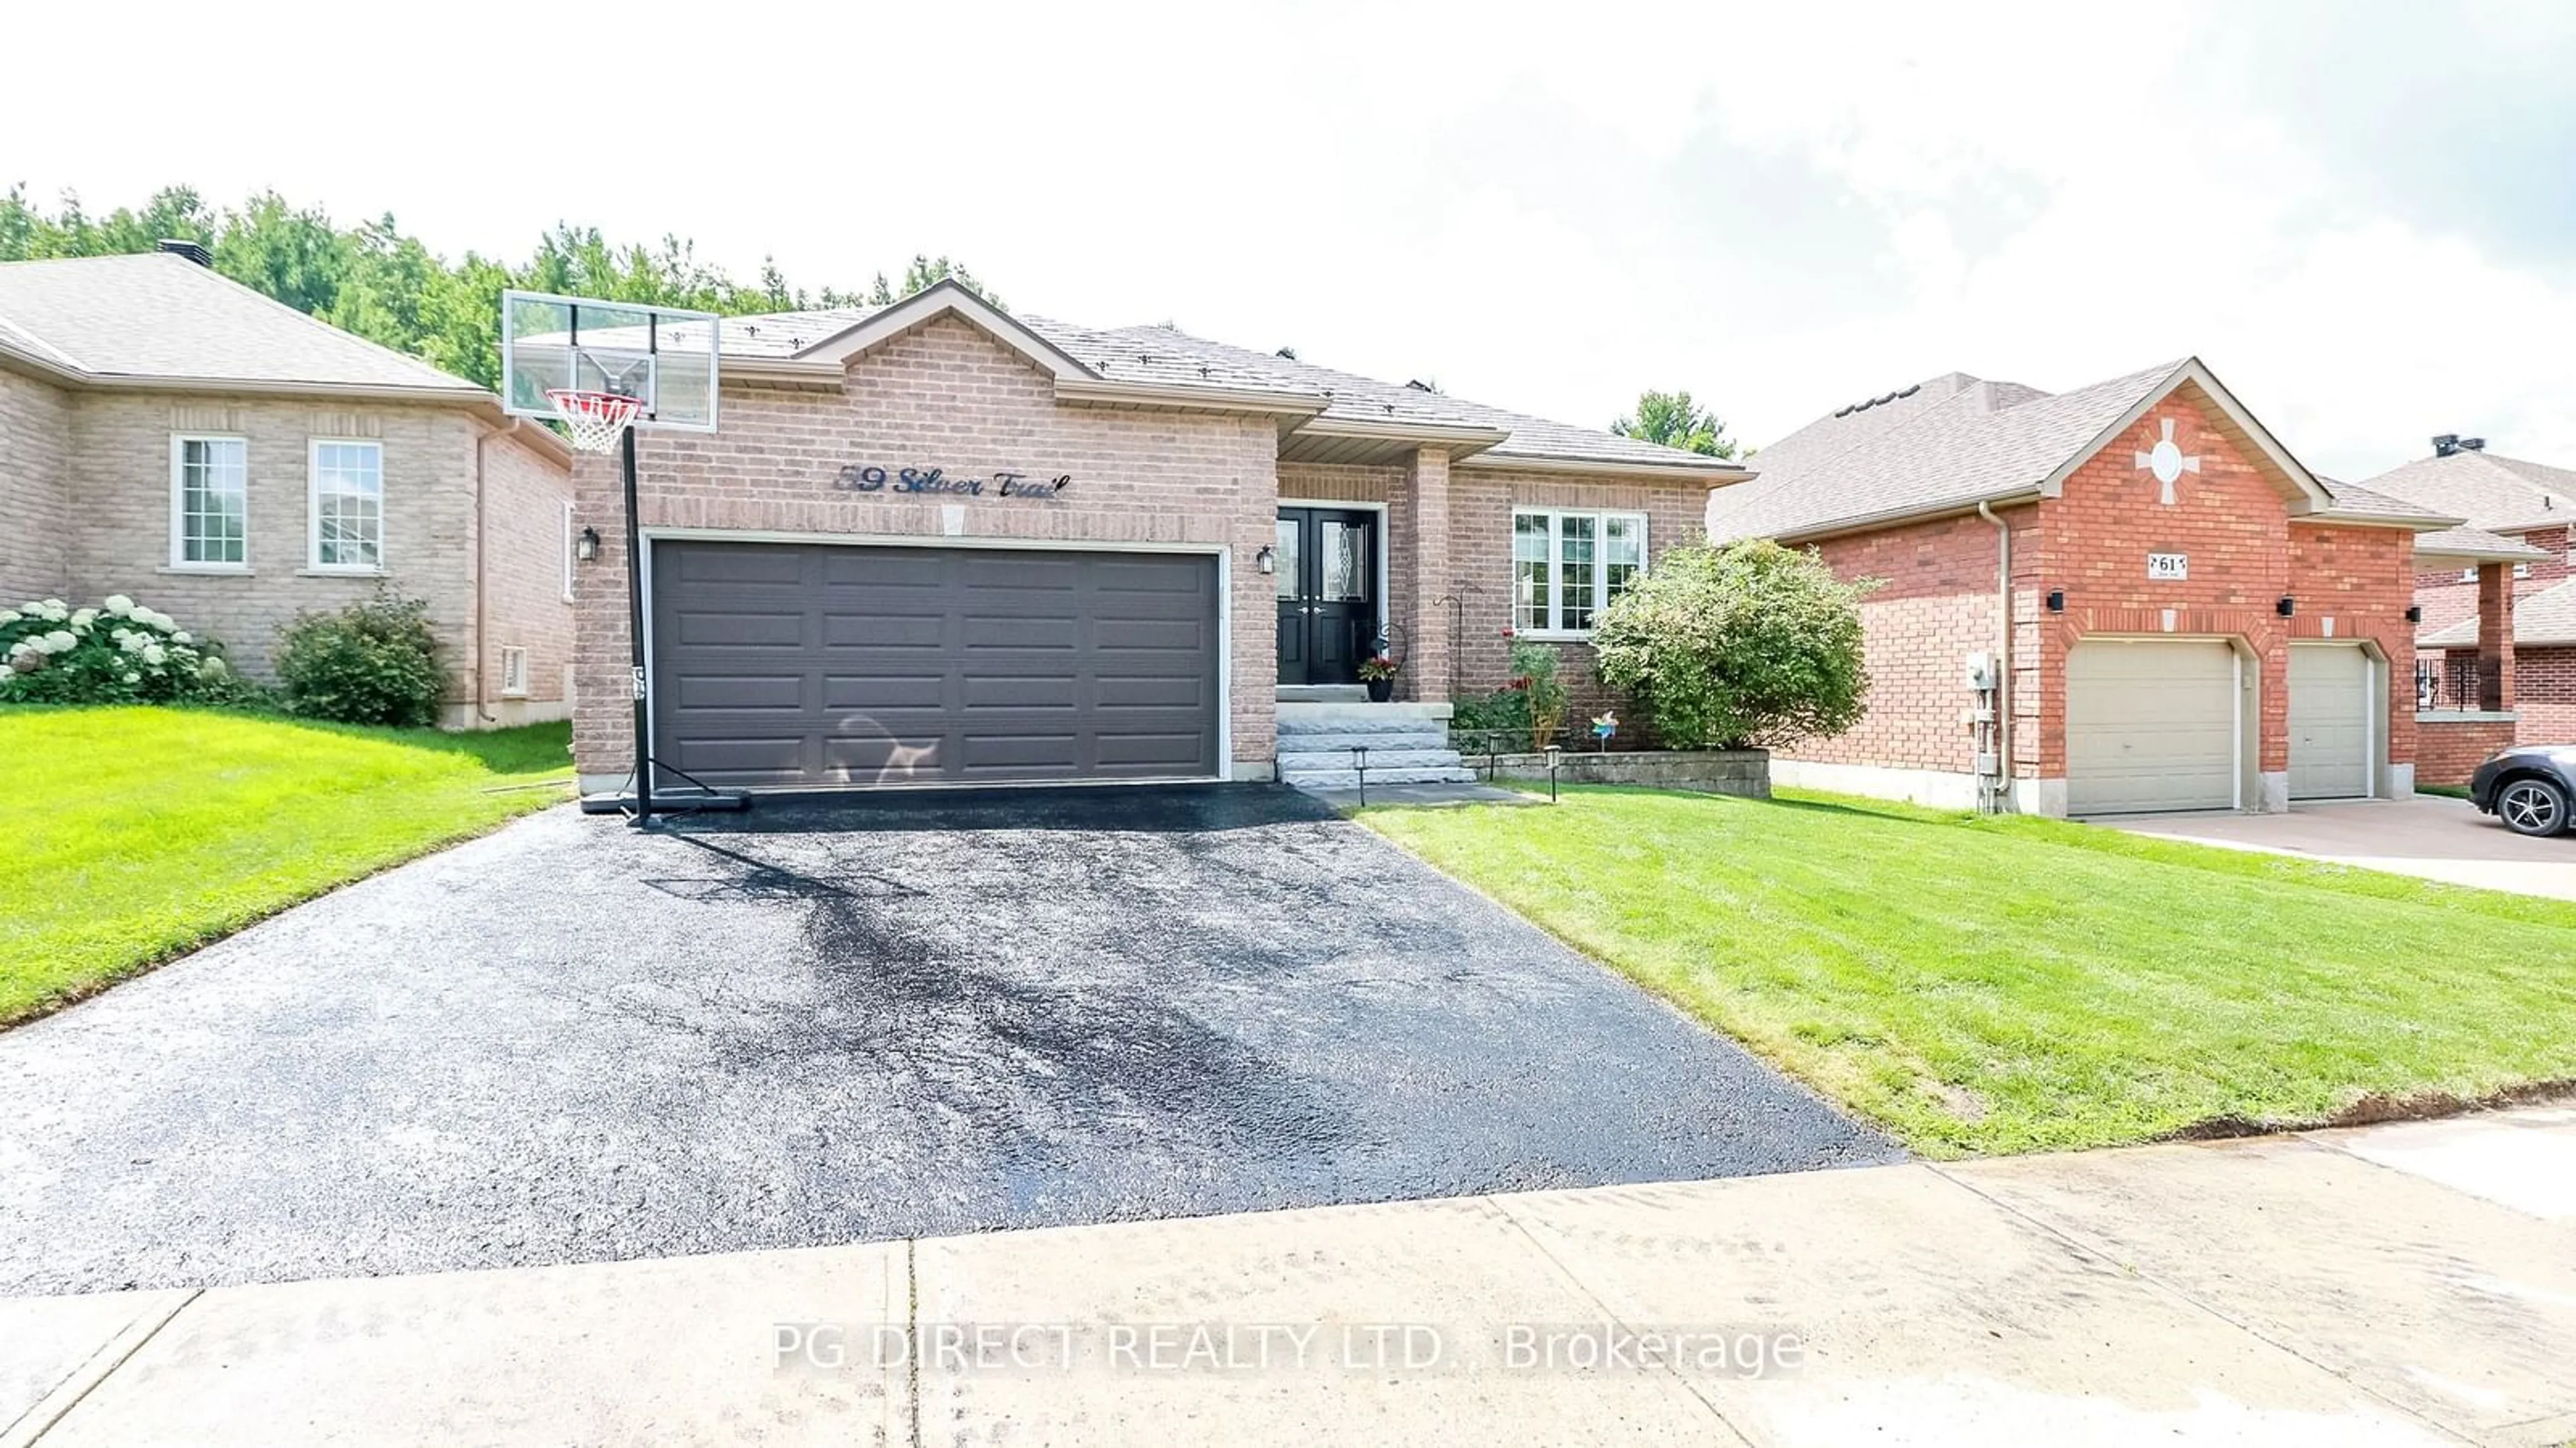 Home with brick exterior material for 59 Silver Tr, Barrie Ontario L4N 3P2